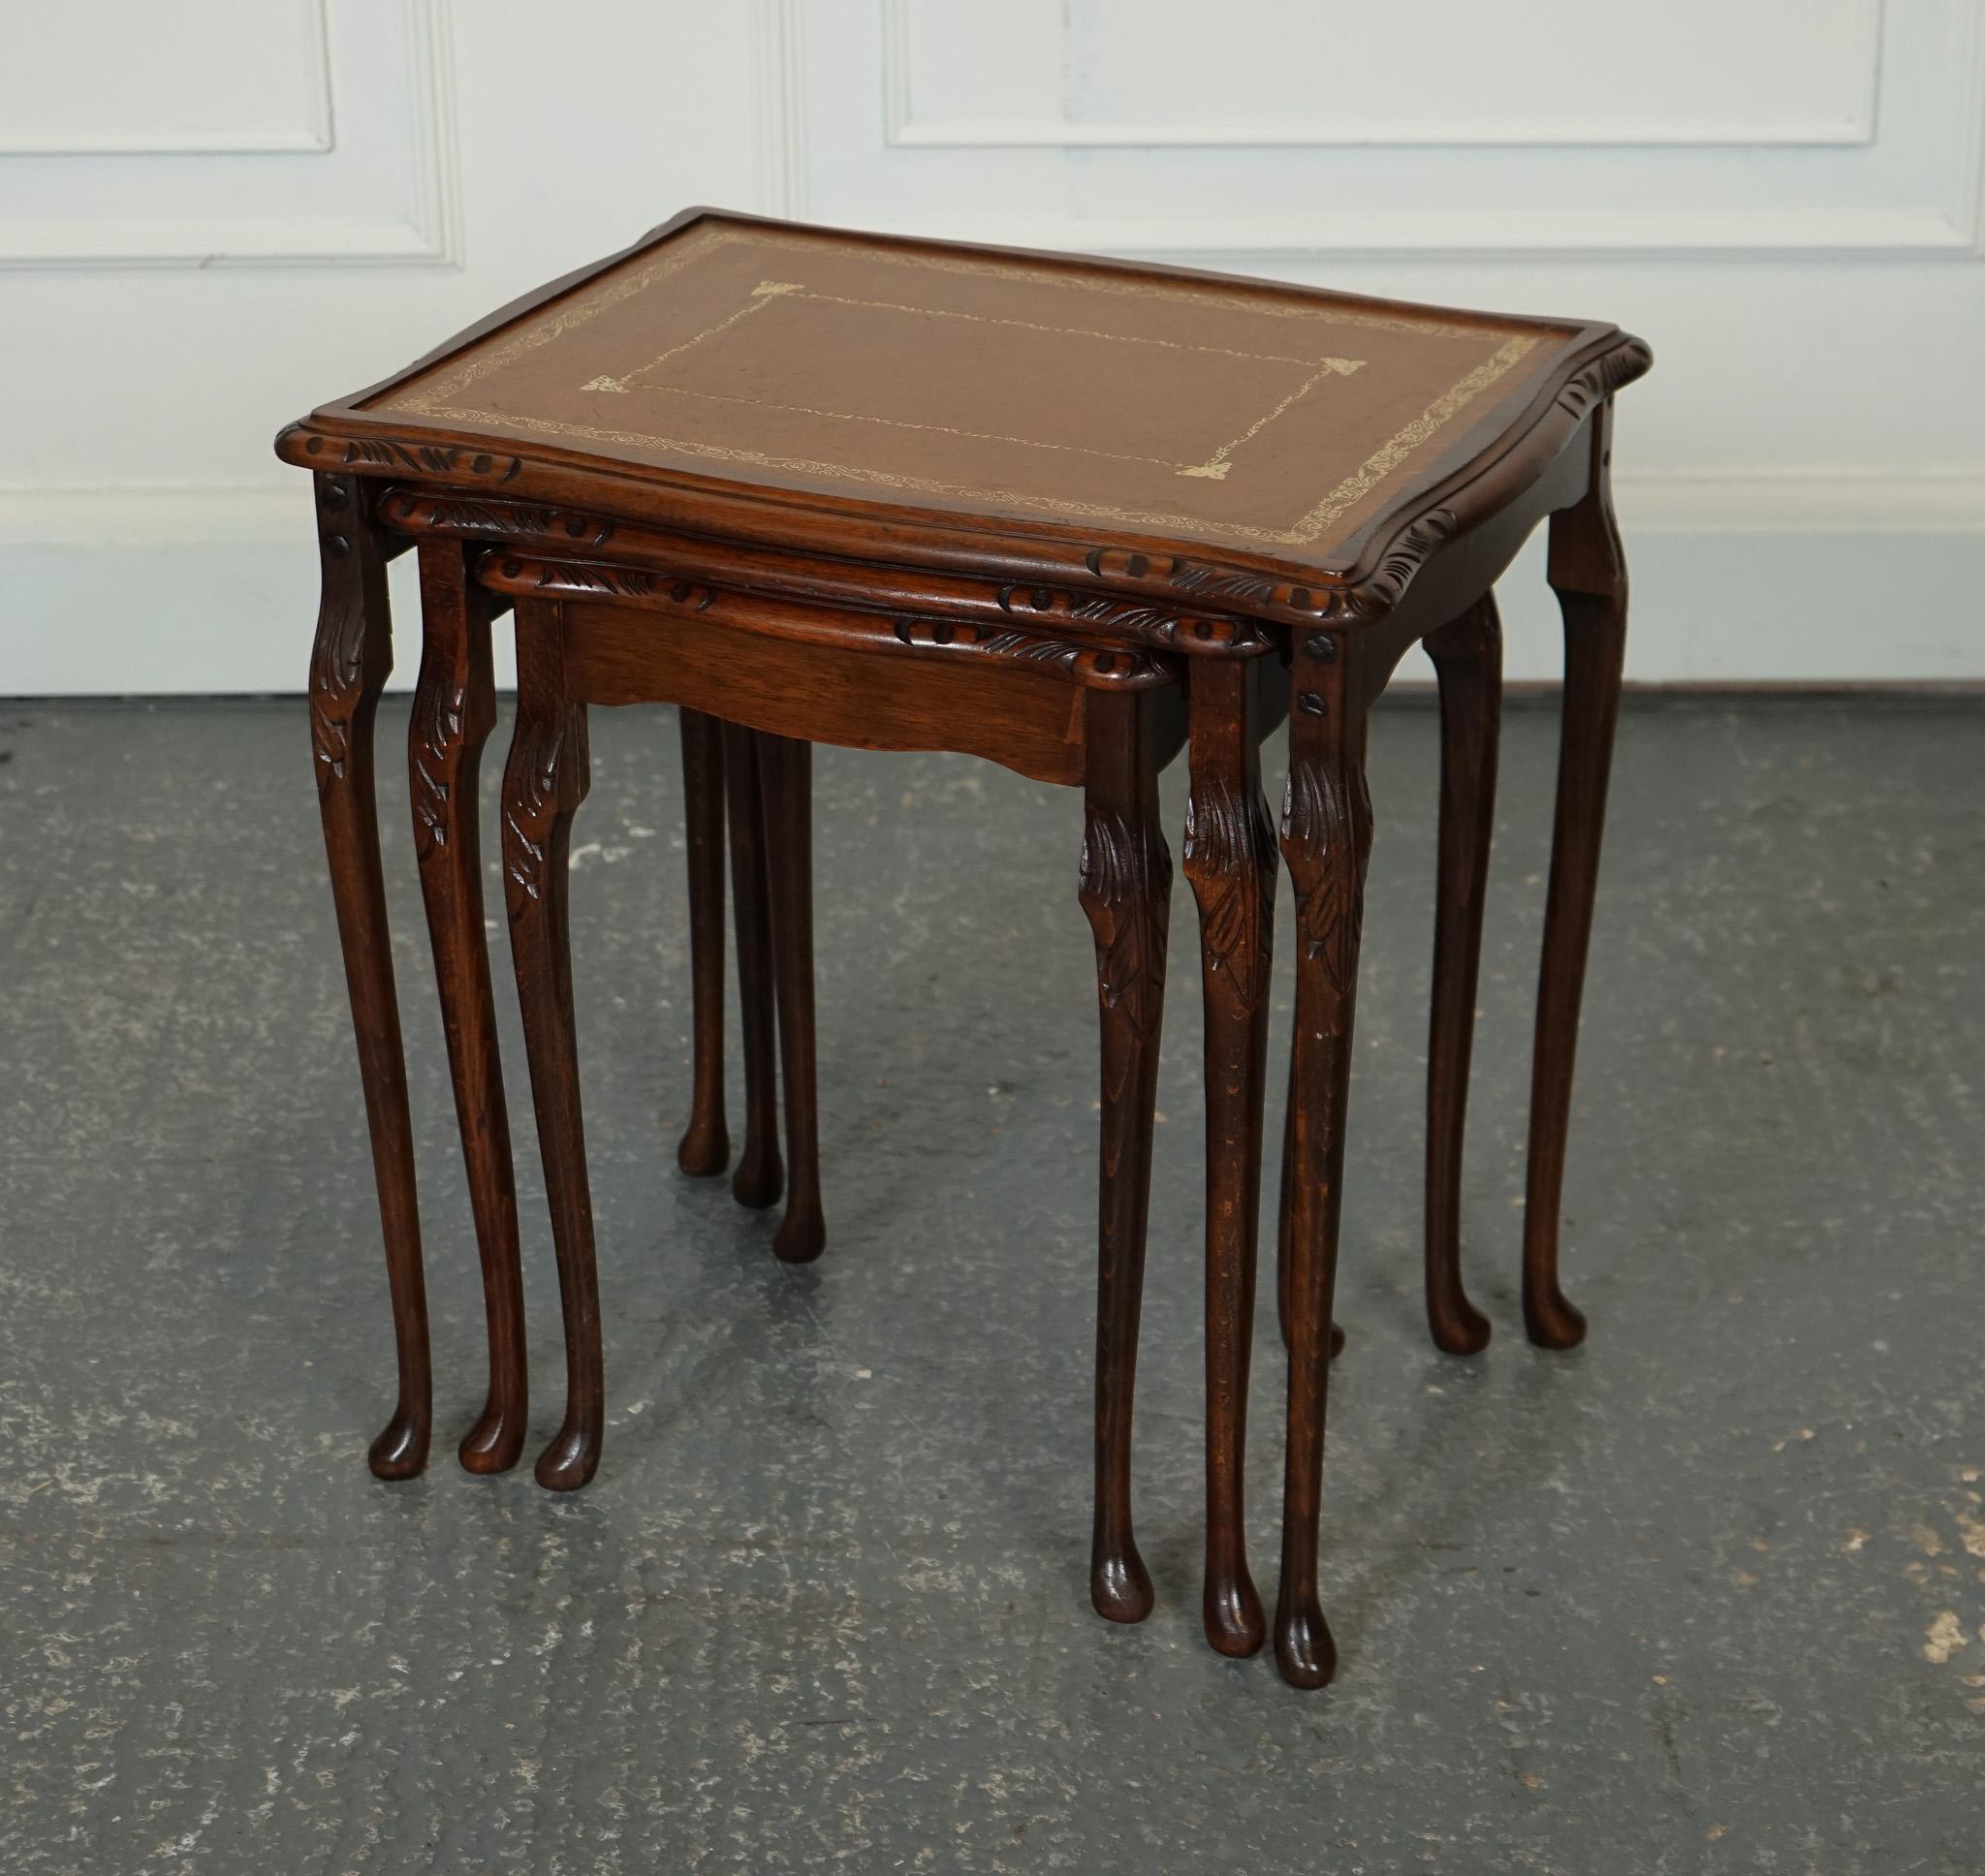 British VINTAGE NEST OF TABLES QUEEN ANNE STYLE LEGS WiTH BROWN EMBOSSED LEATHER TOP J1 For Sale